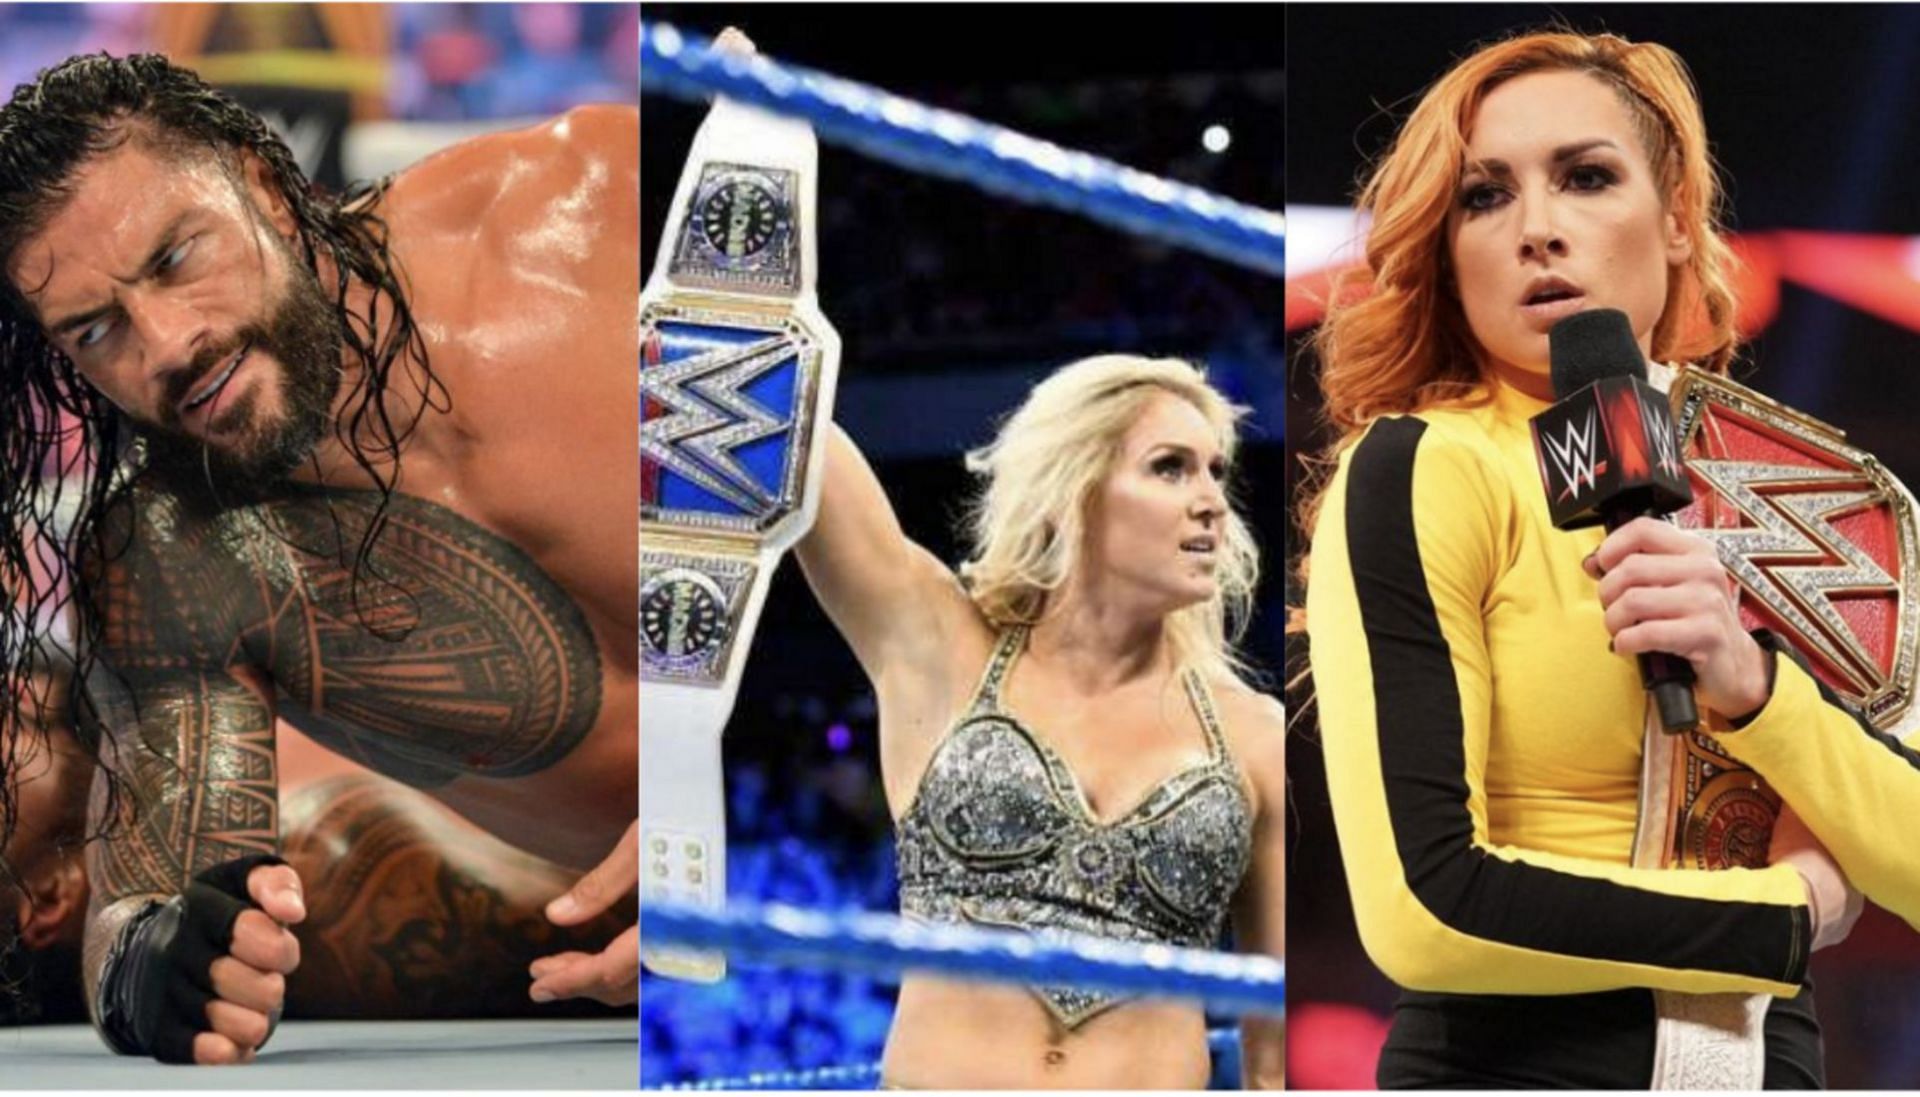 WWE SuperShow: Roman Reigns, Becky Lynch, Charlotte Flair in action